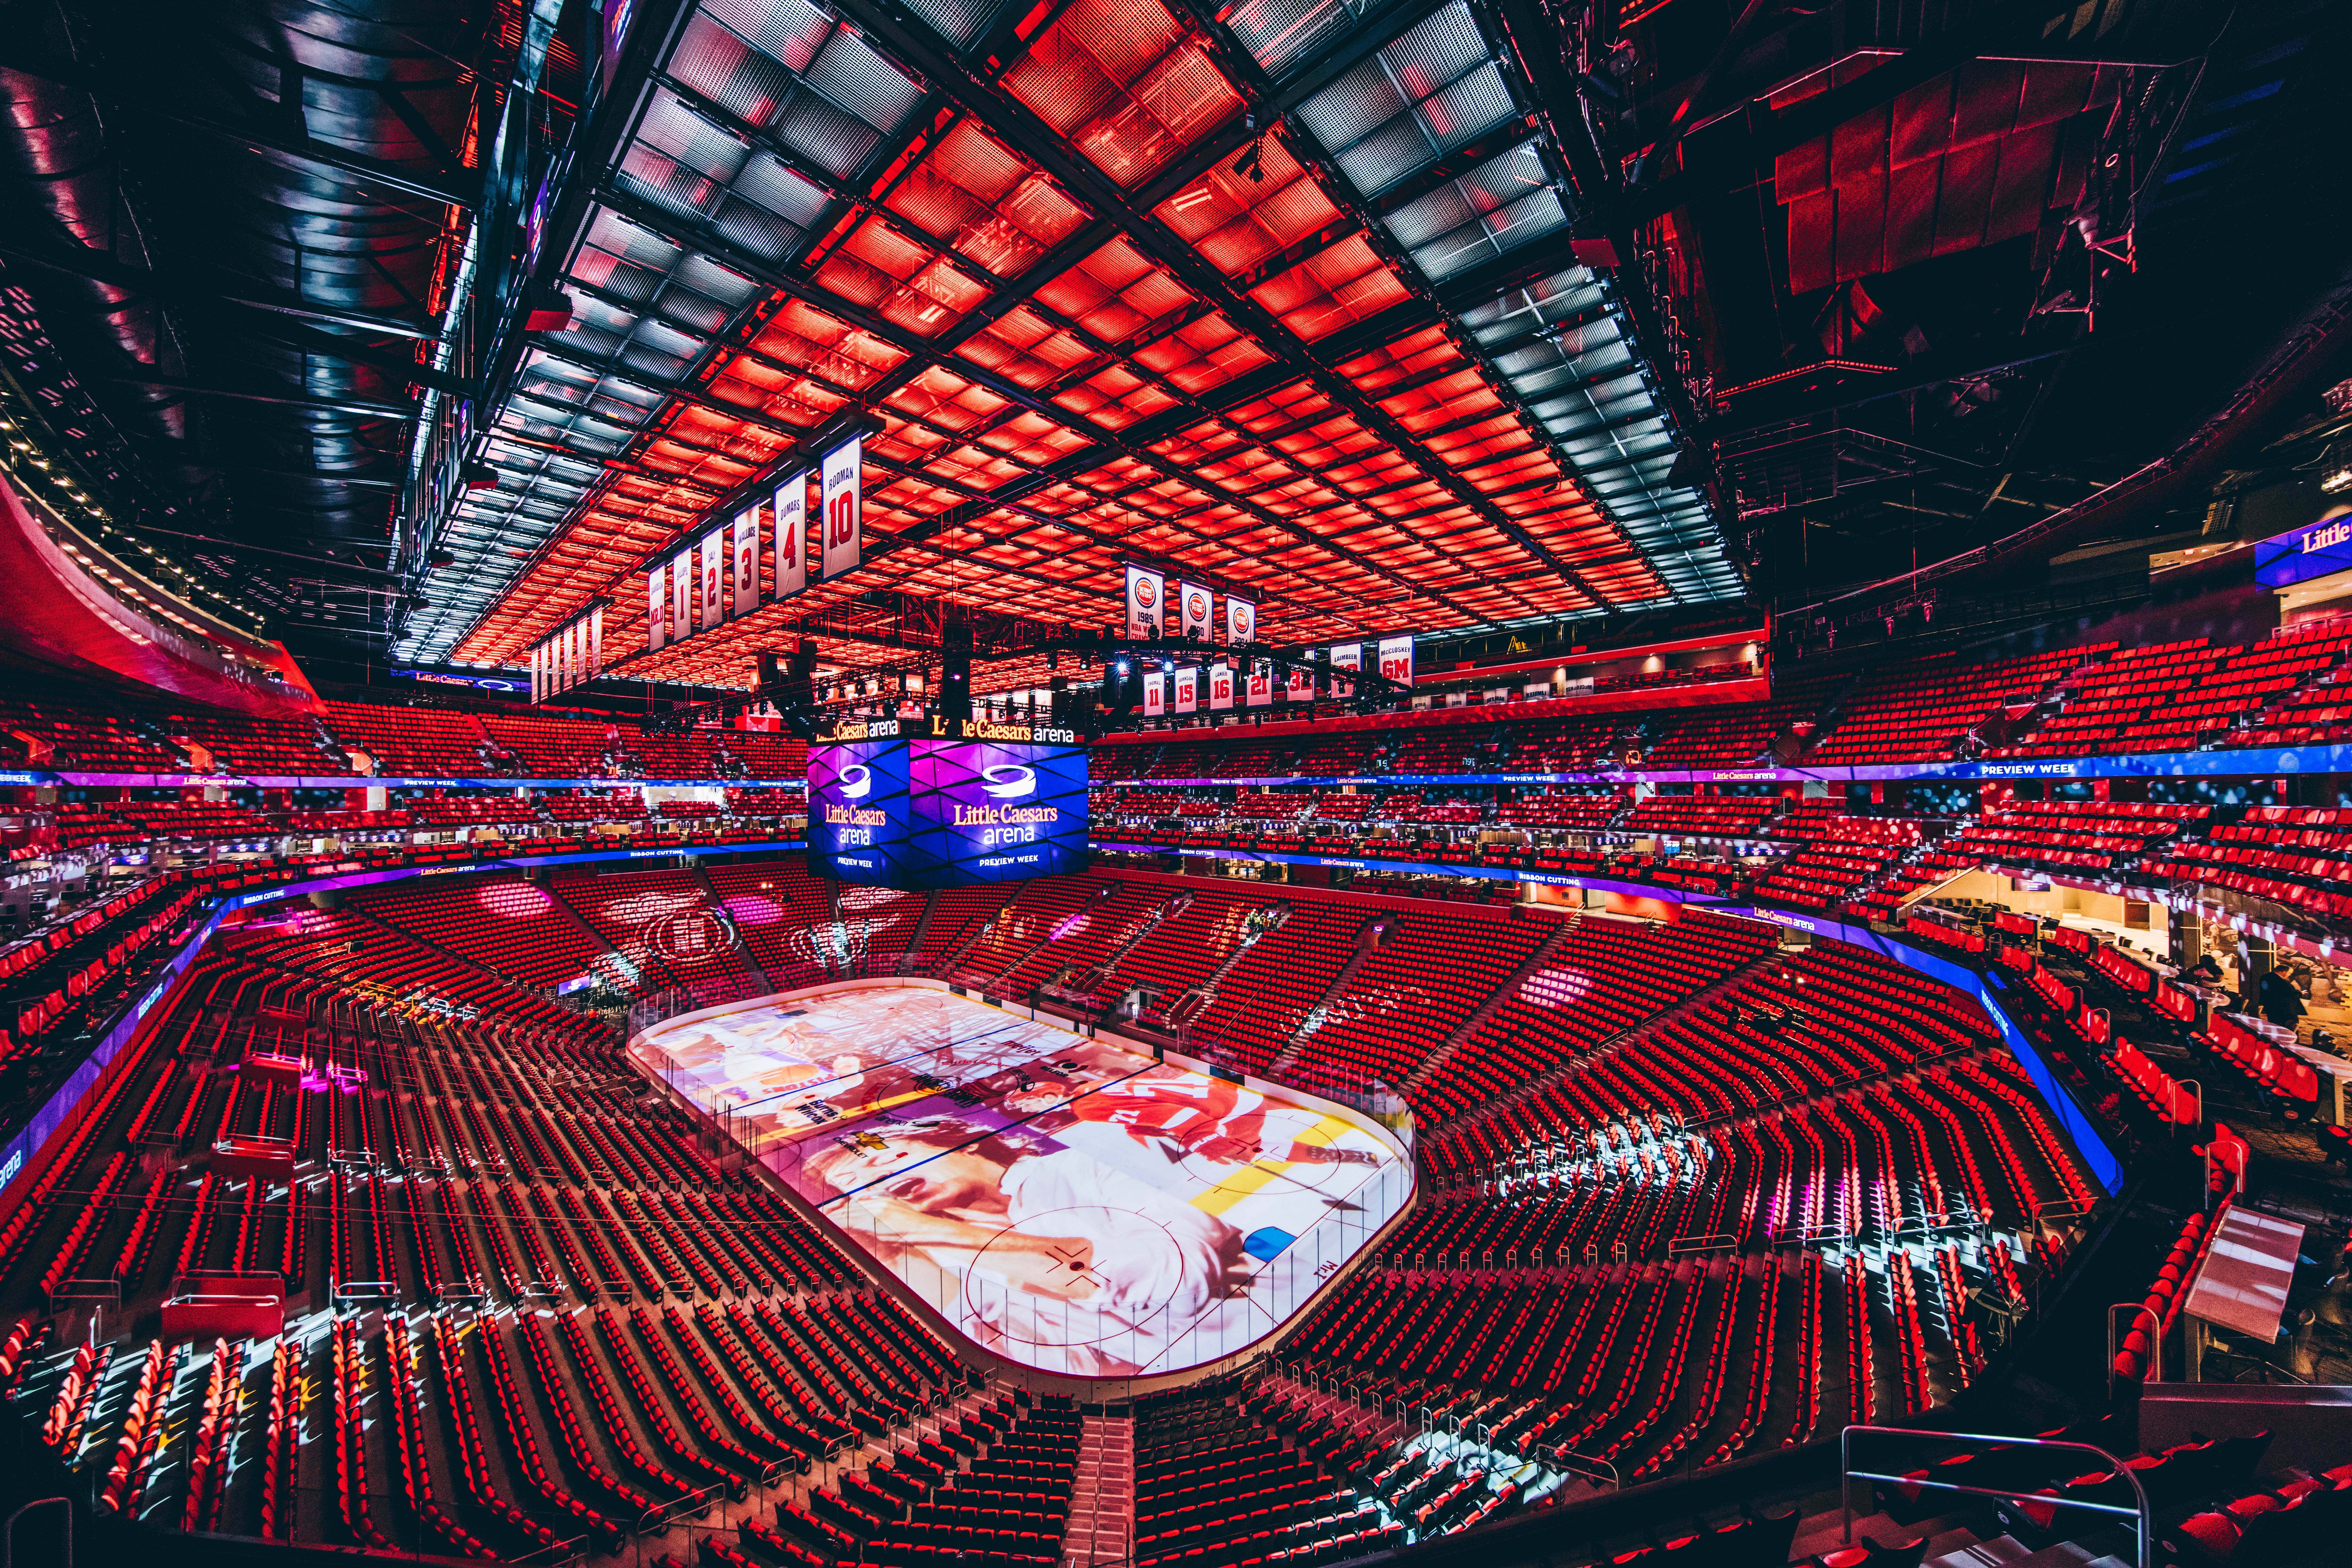 Detroit's New Little Caesars Arena Officially Opens